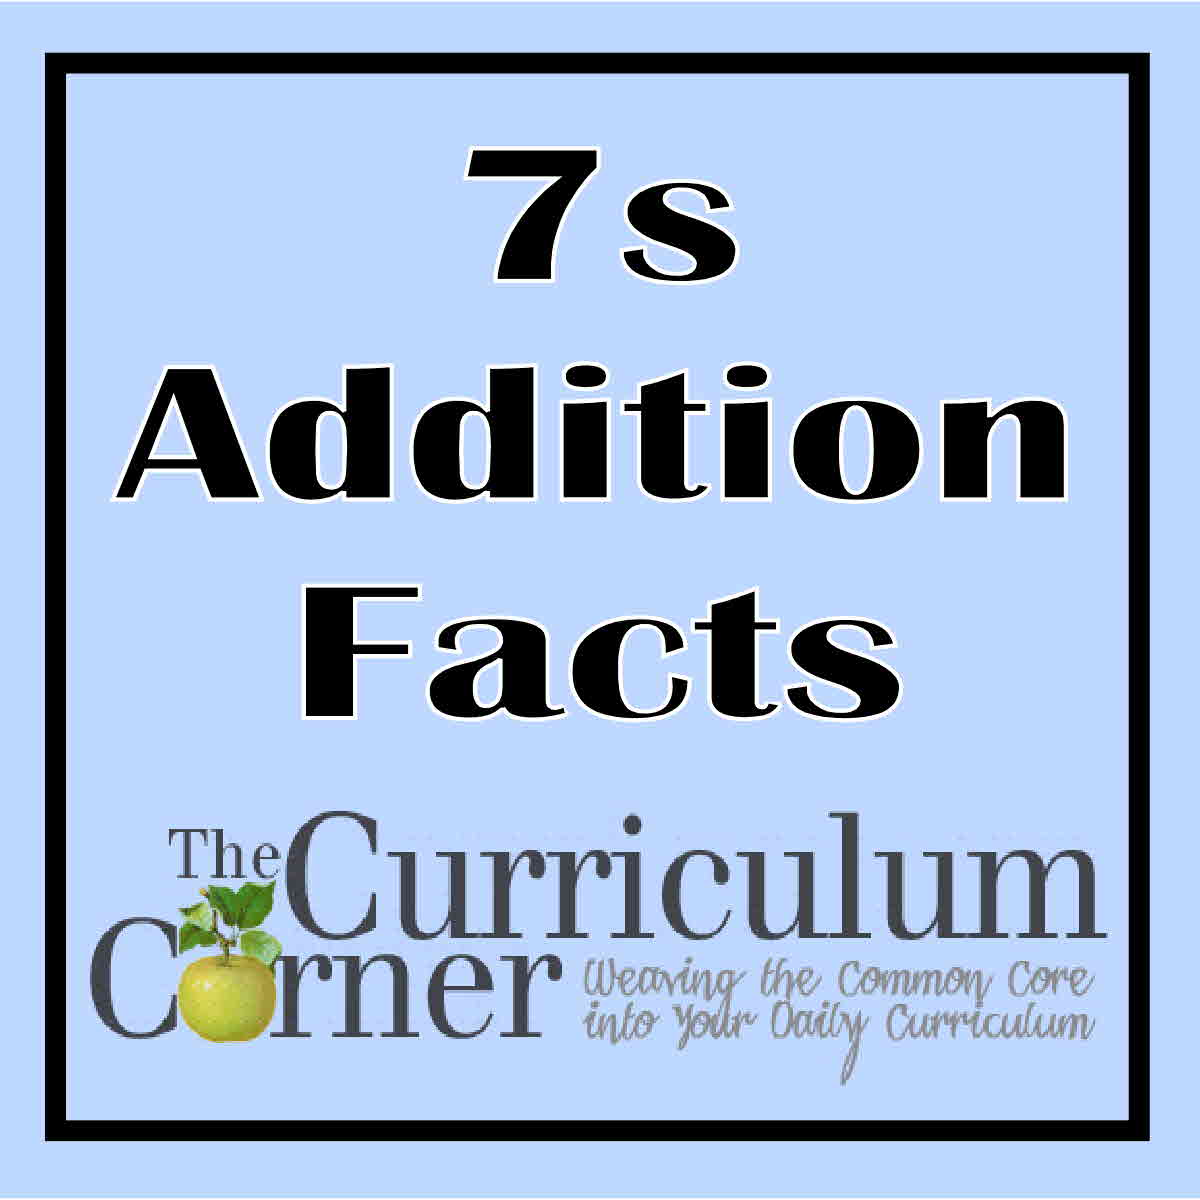 7s-addition-facts